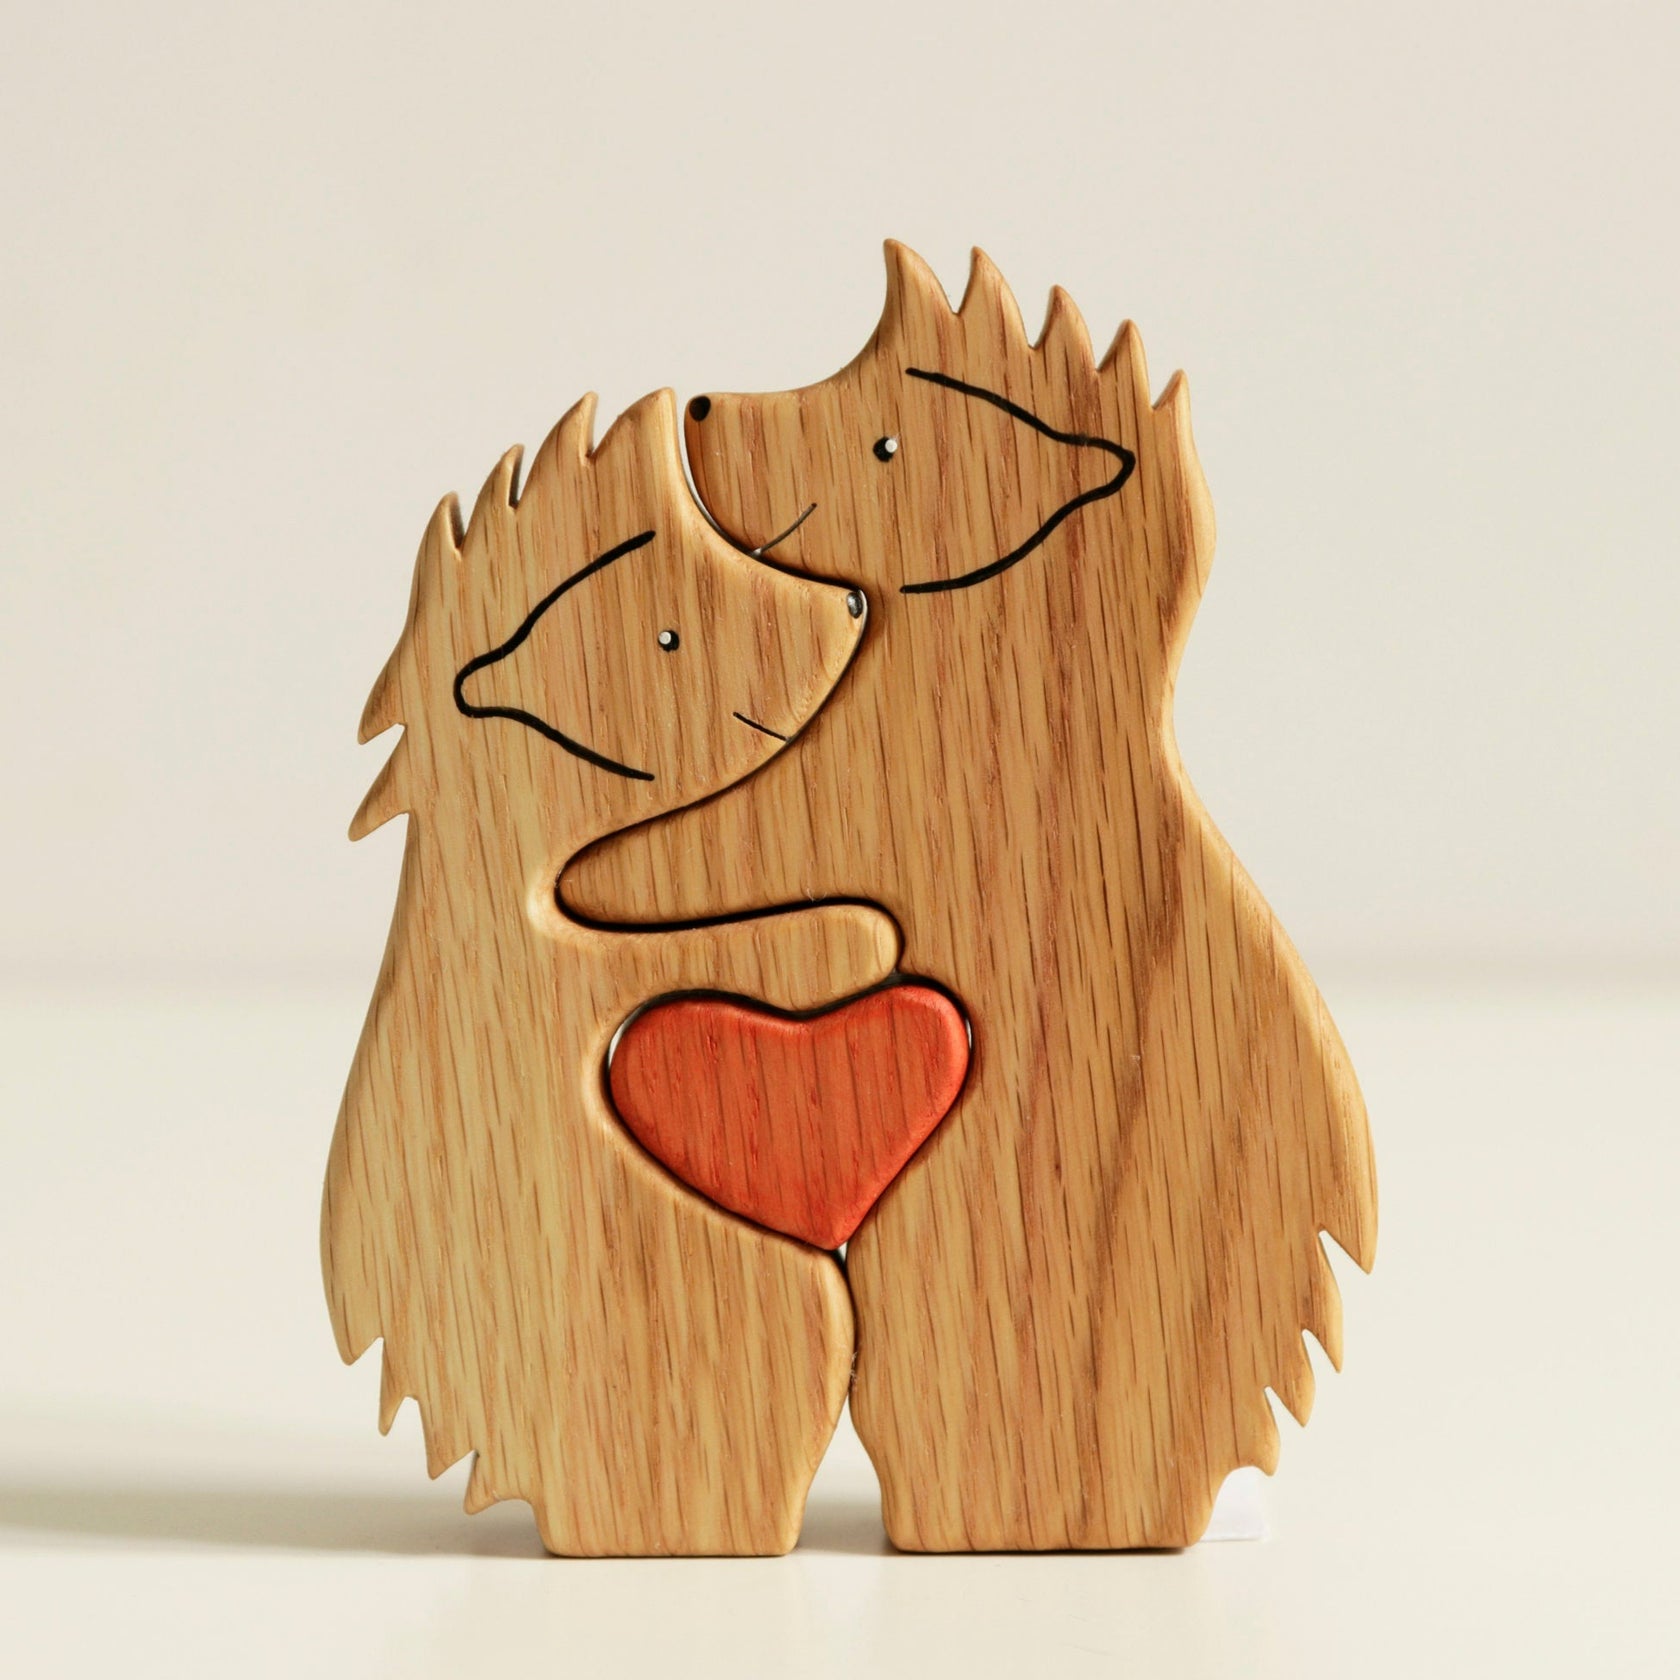 Wooden hedgehogs family puzzle